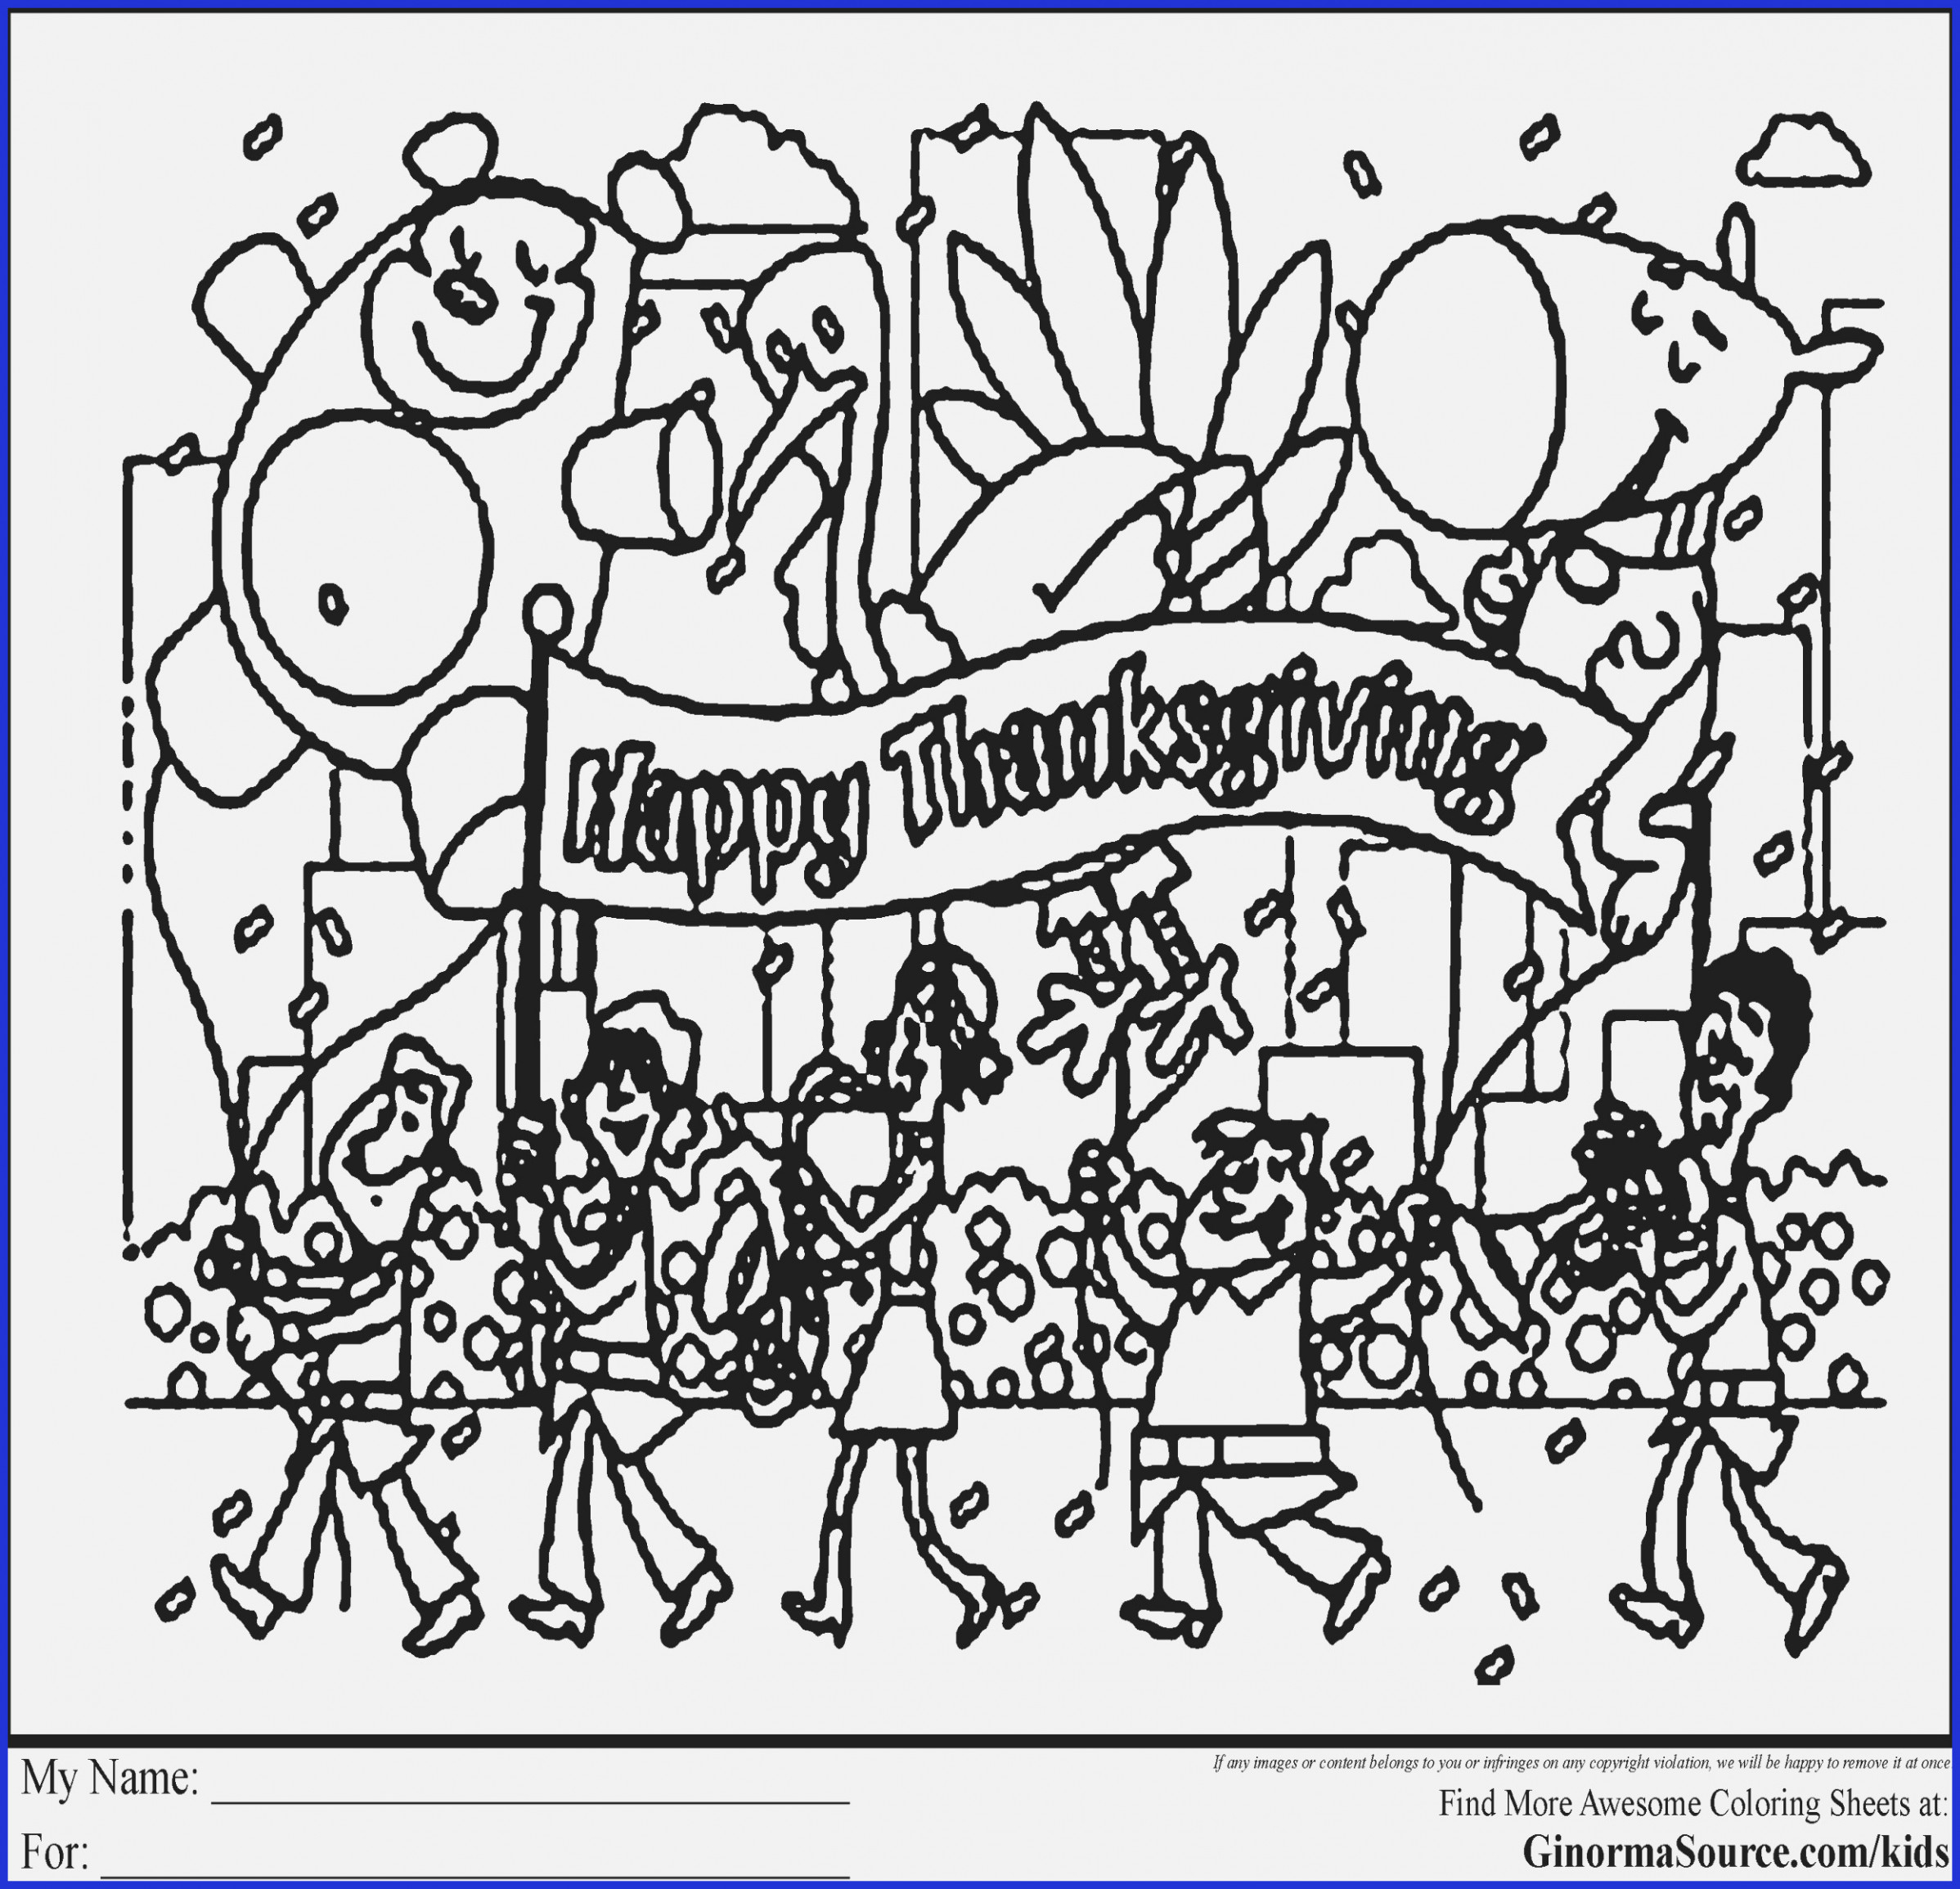 Name Coloring Page Fall Color Pages 16 Inspirational Coloring Pages With Names Www